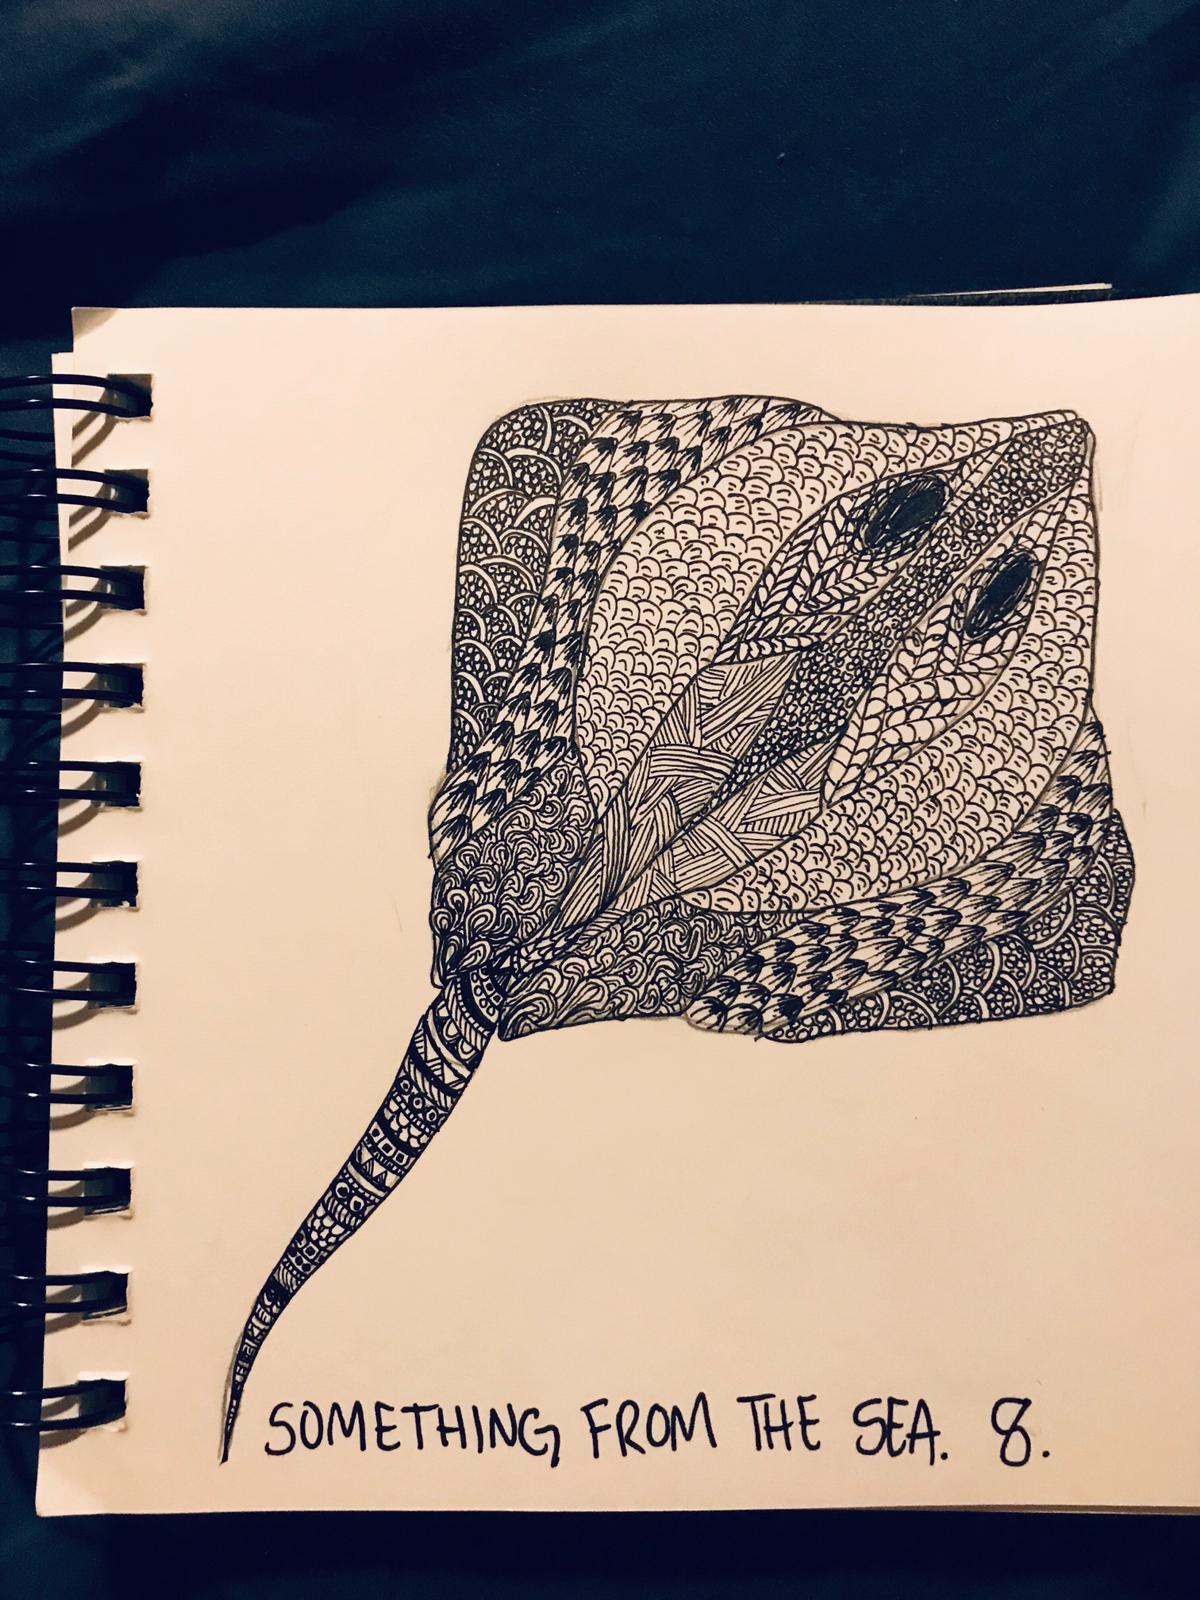 An ink picture of a ray that has a lot of cool repeating patterns